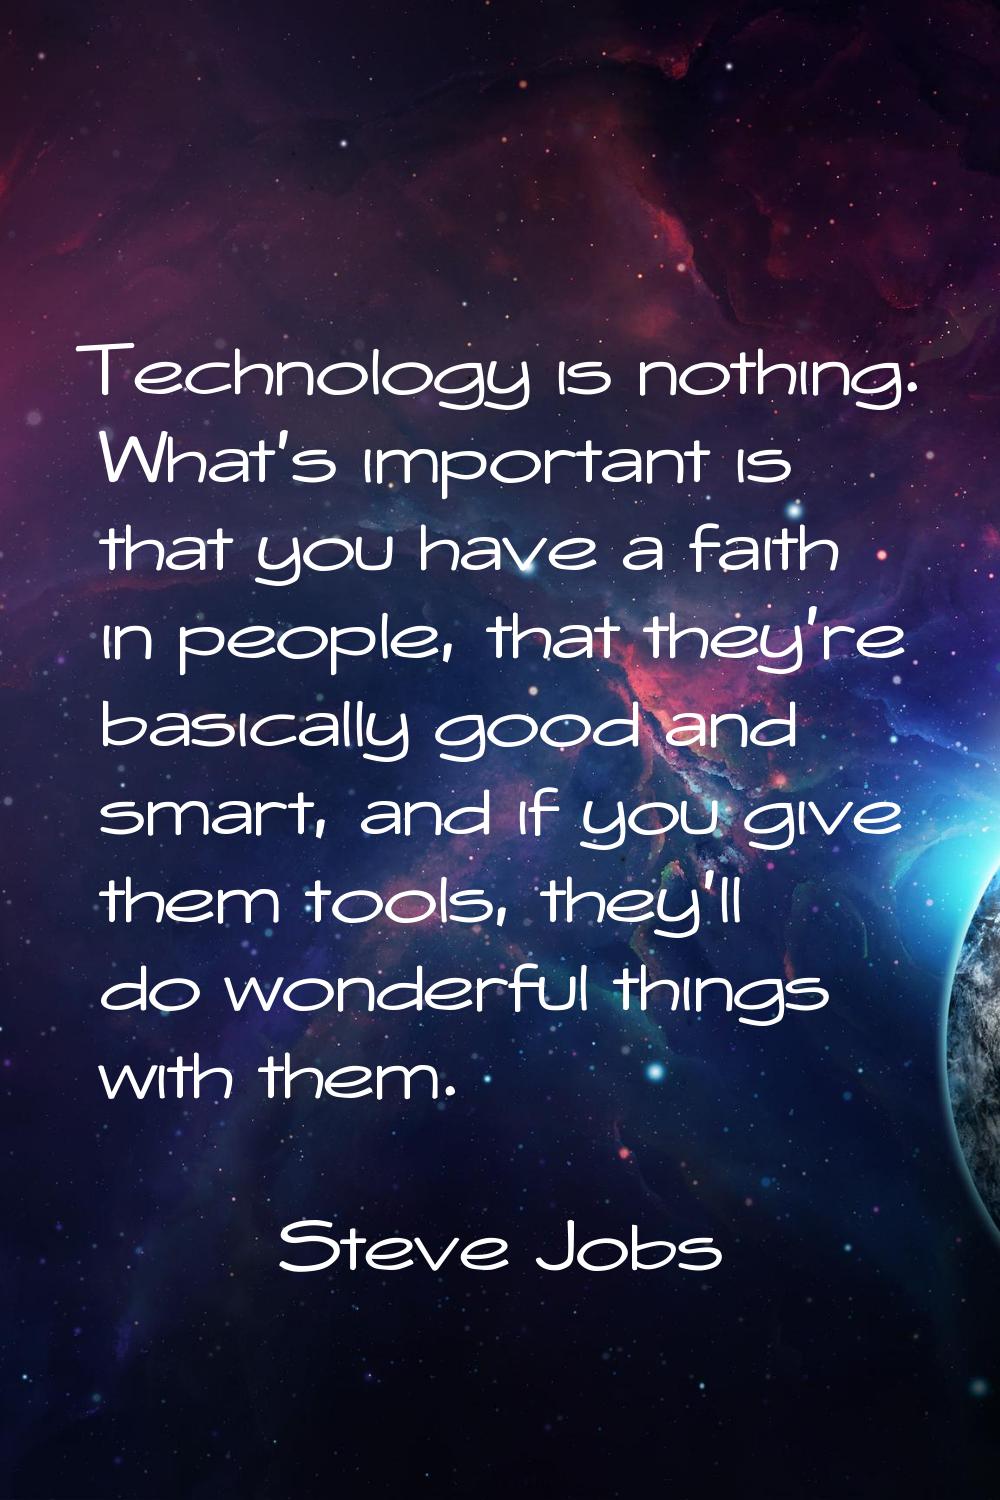 Technology is nothing. What's important is that you have a faith in people, that they're basically 